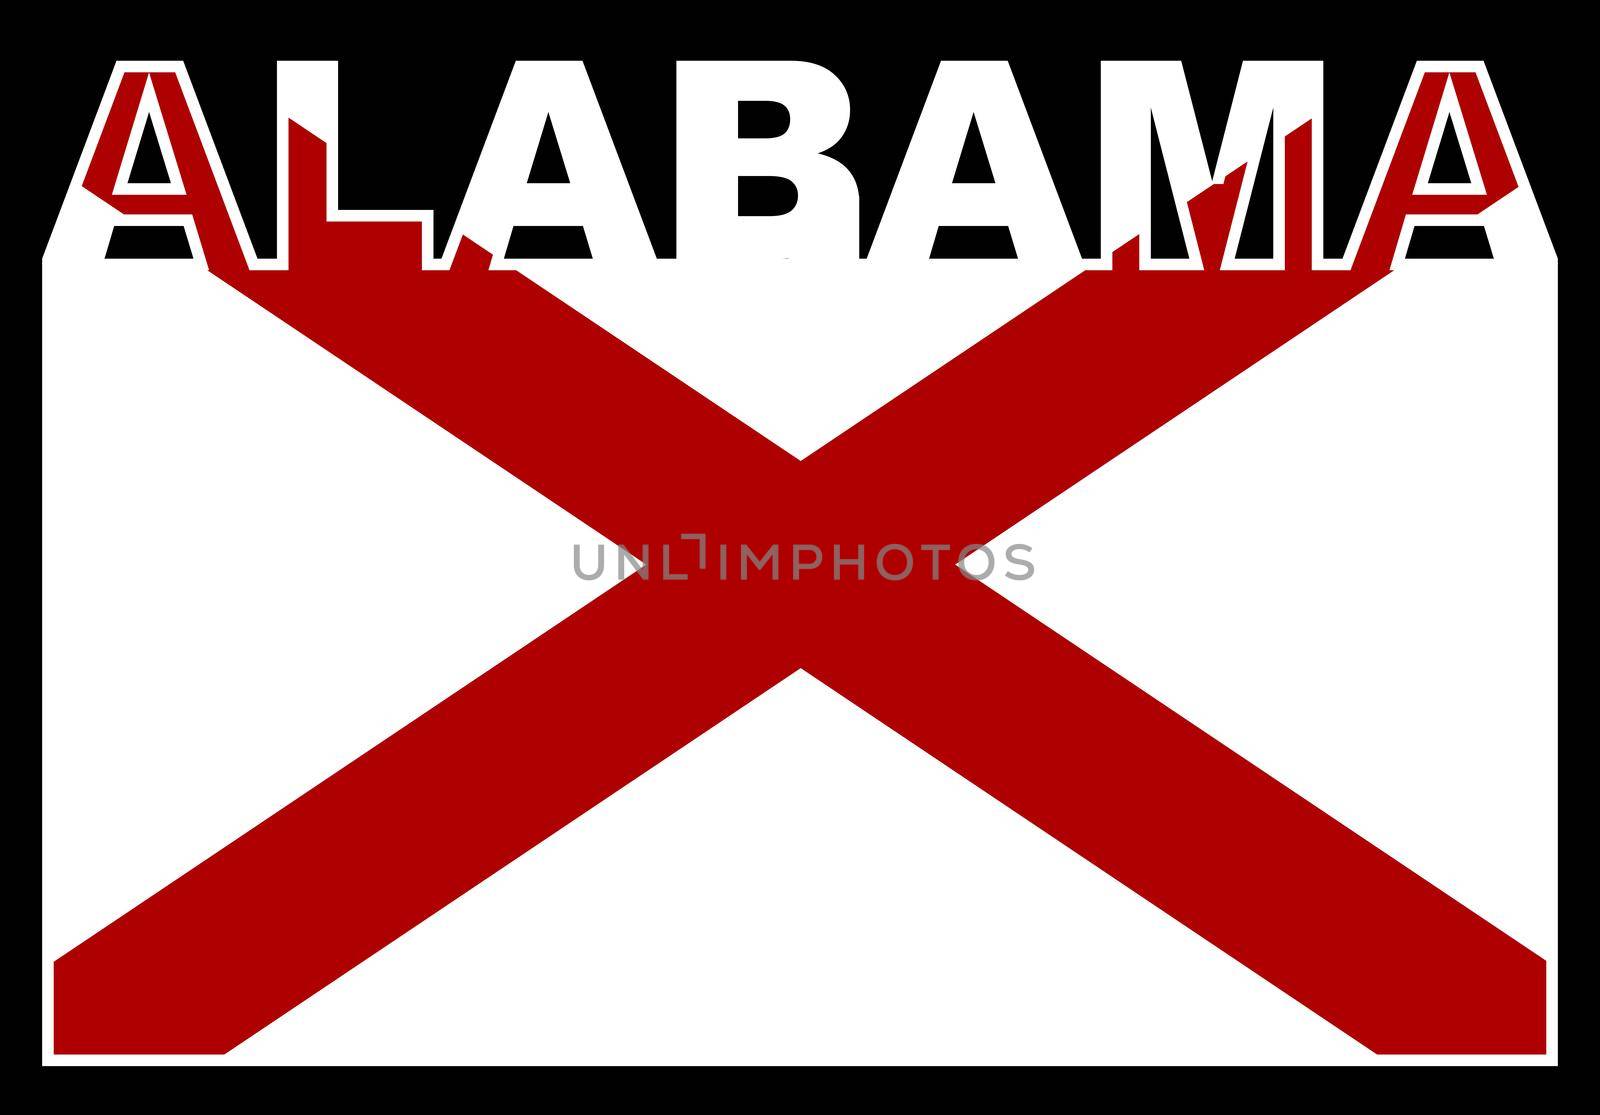 Alabama state text in silhouette set over the state flag